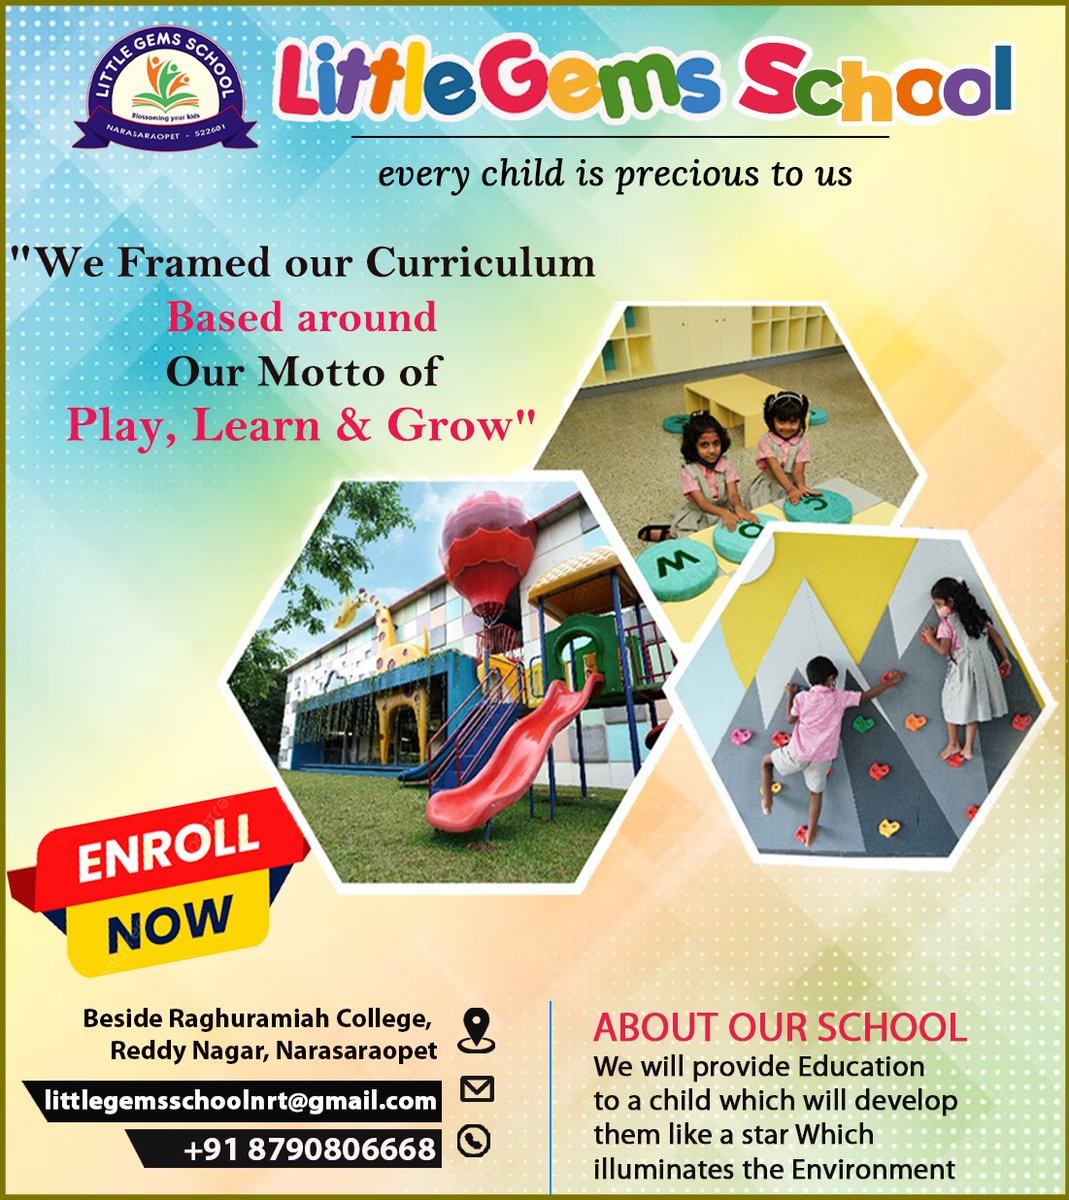 We framed our Curriculam based around our motto
 of play ,Learn & grow 
Contact : +91 87908 06668
Email     : +littlegemsschoolnrt@gmail.com
#littlegemsschool #bestschoolinnrt #playwaymethod #schools
#teachingmethods #AcademicDevelopment